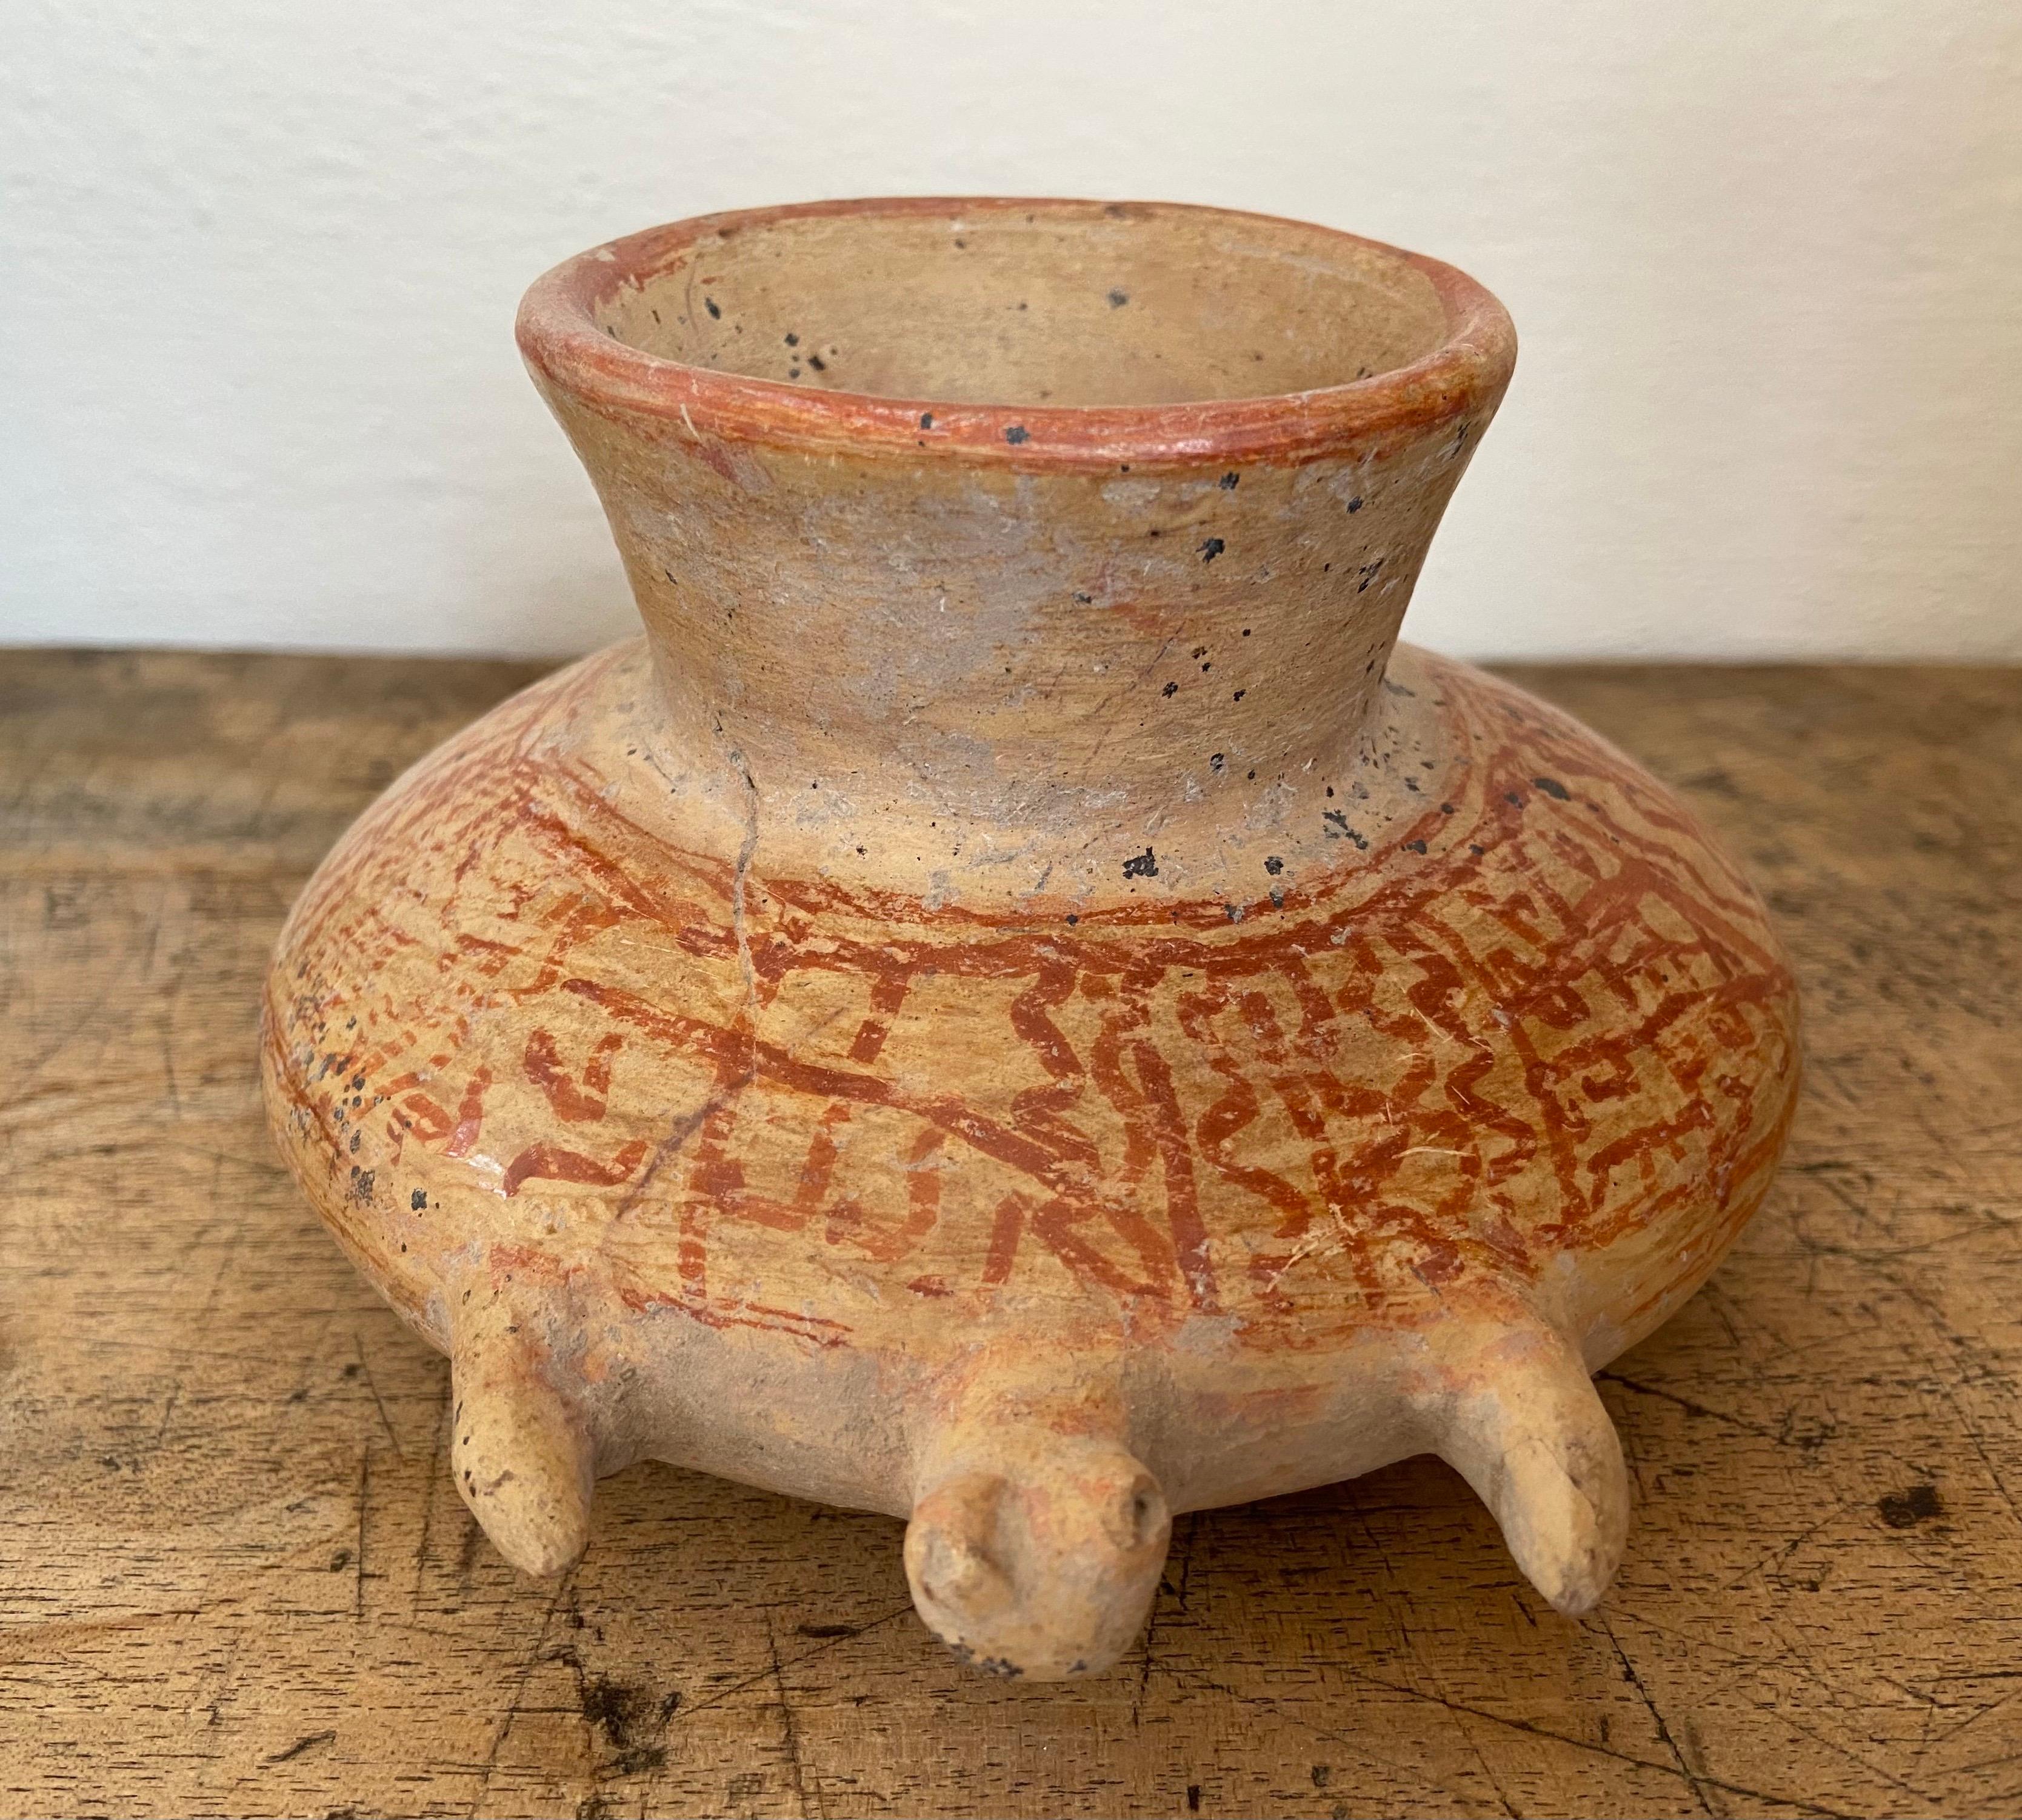 Prehispanic ceramic turtle vessel with red paint, Located outside the village of Santiago, Nayarit, Mexico, date unknown.